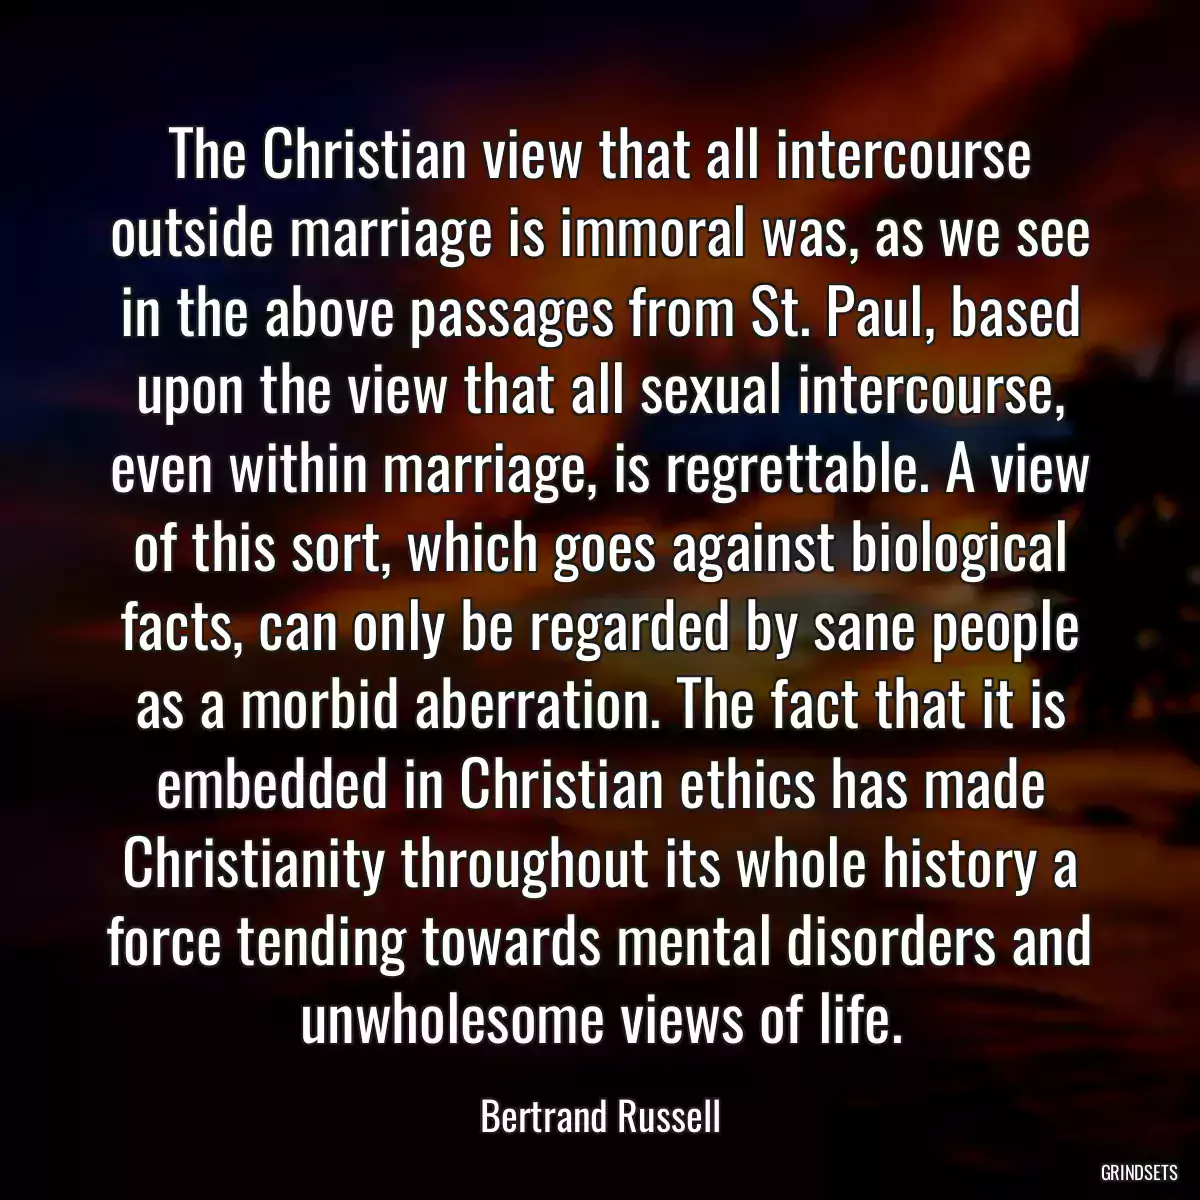 The Christian view that all intercourse outside marriage is immoral was, as we see in the above passages from St. Paul, based upon the view that all sexual intercourse, even within marriage, is regrettable. A view of this sort, which goes against biological facts, can only be regarded by sane people as a morbid aberration. The fact that it is embedded in Christian ethics has made Christianity throughout its whole history a force tending towards mental disorders and unwholesome views of life.